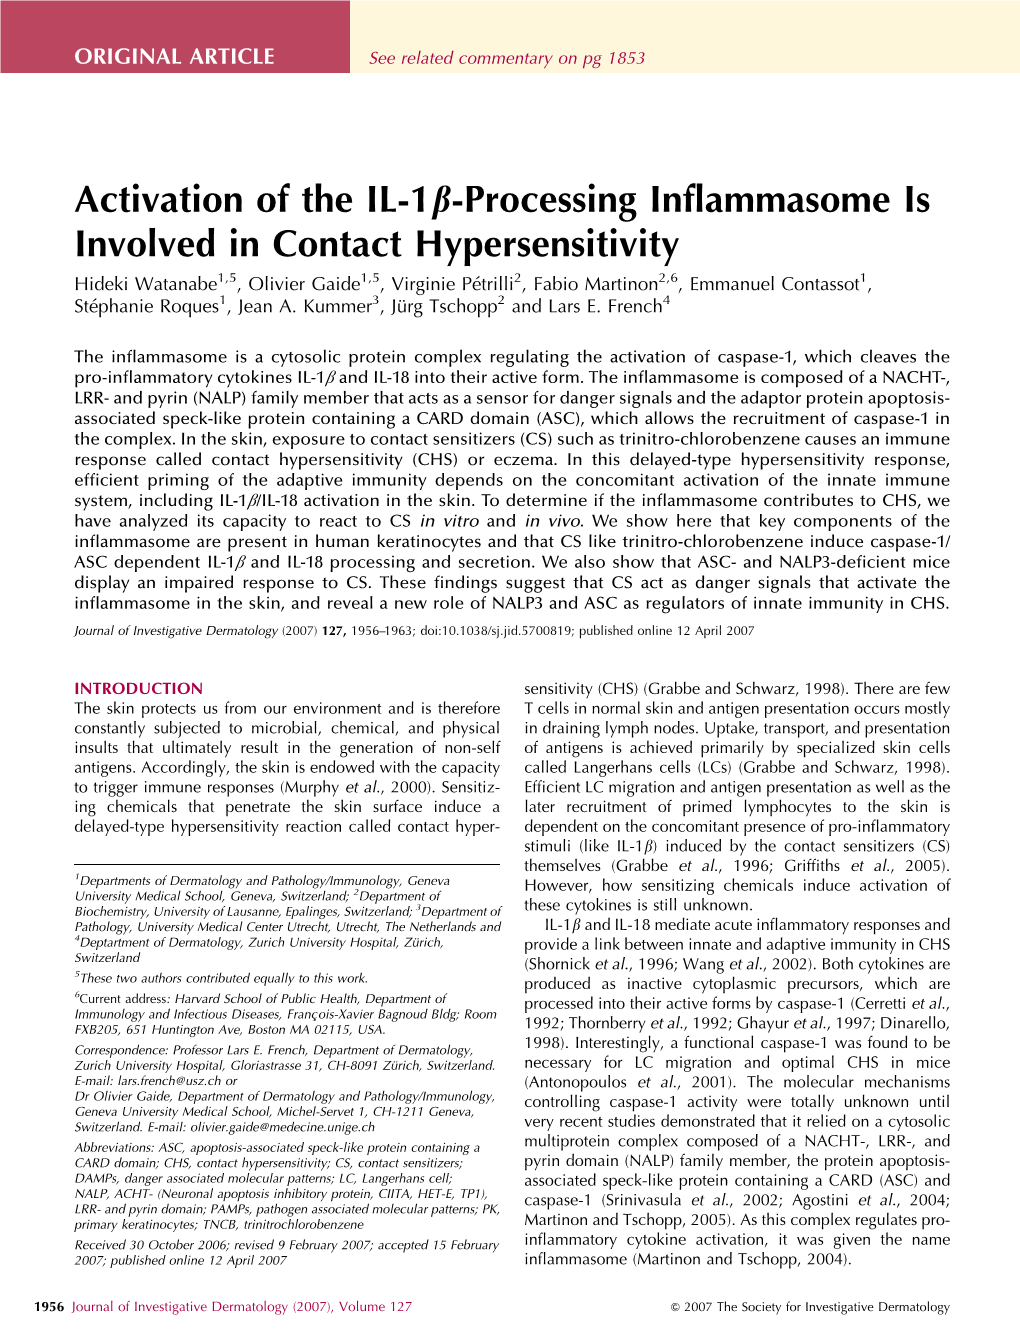 Activation of the IL-1B-Processing Inflammasome Is Involved